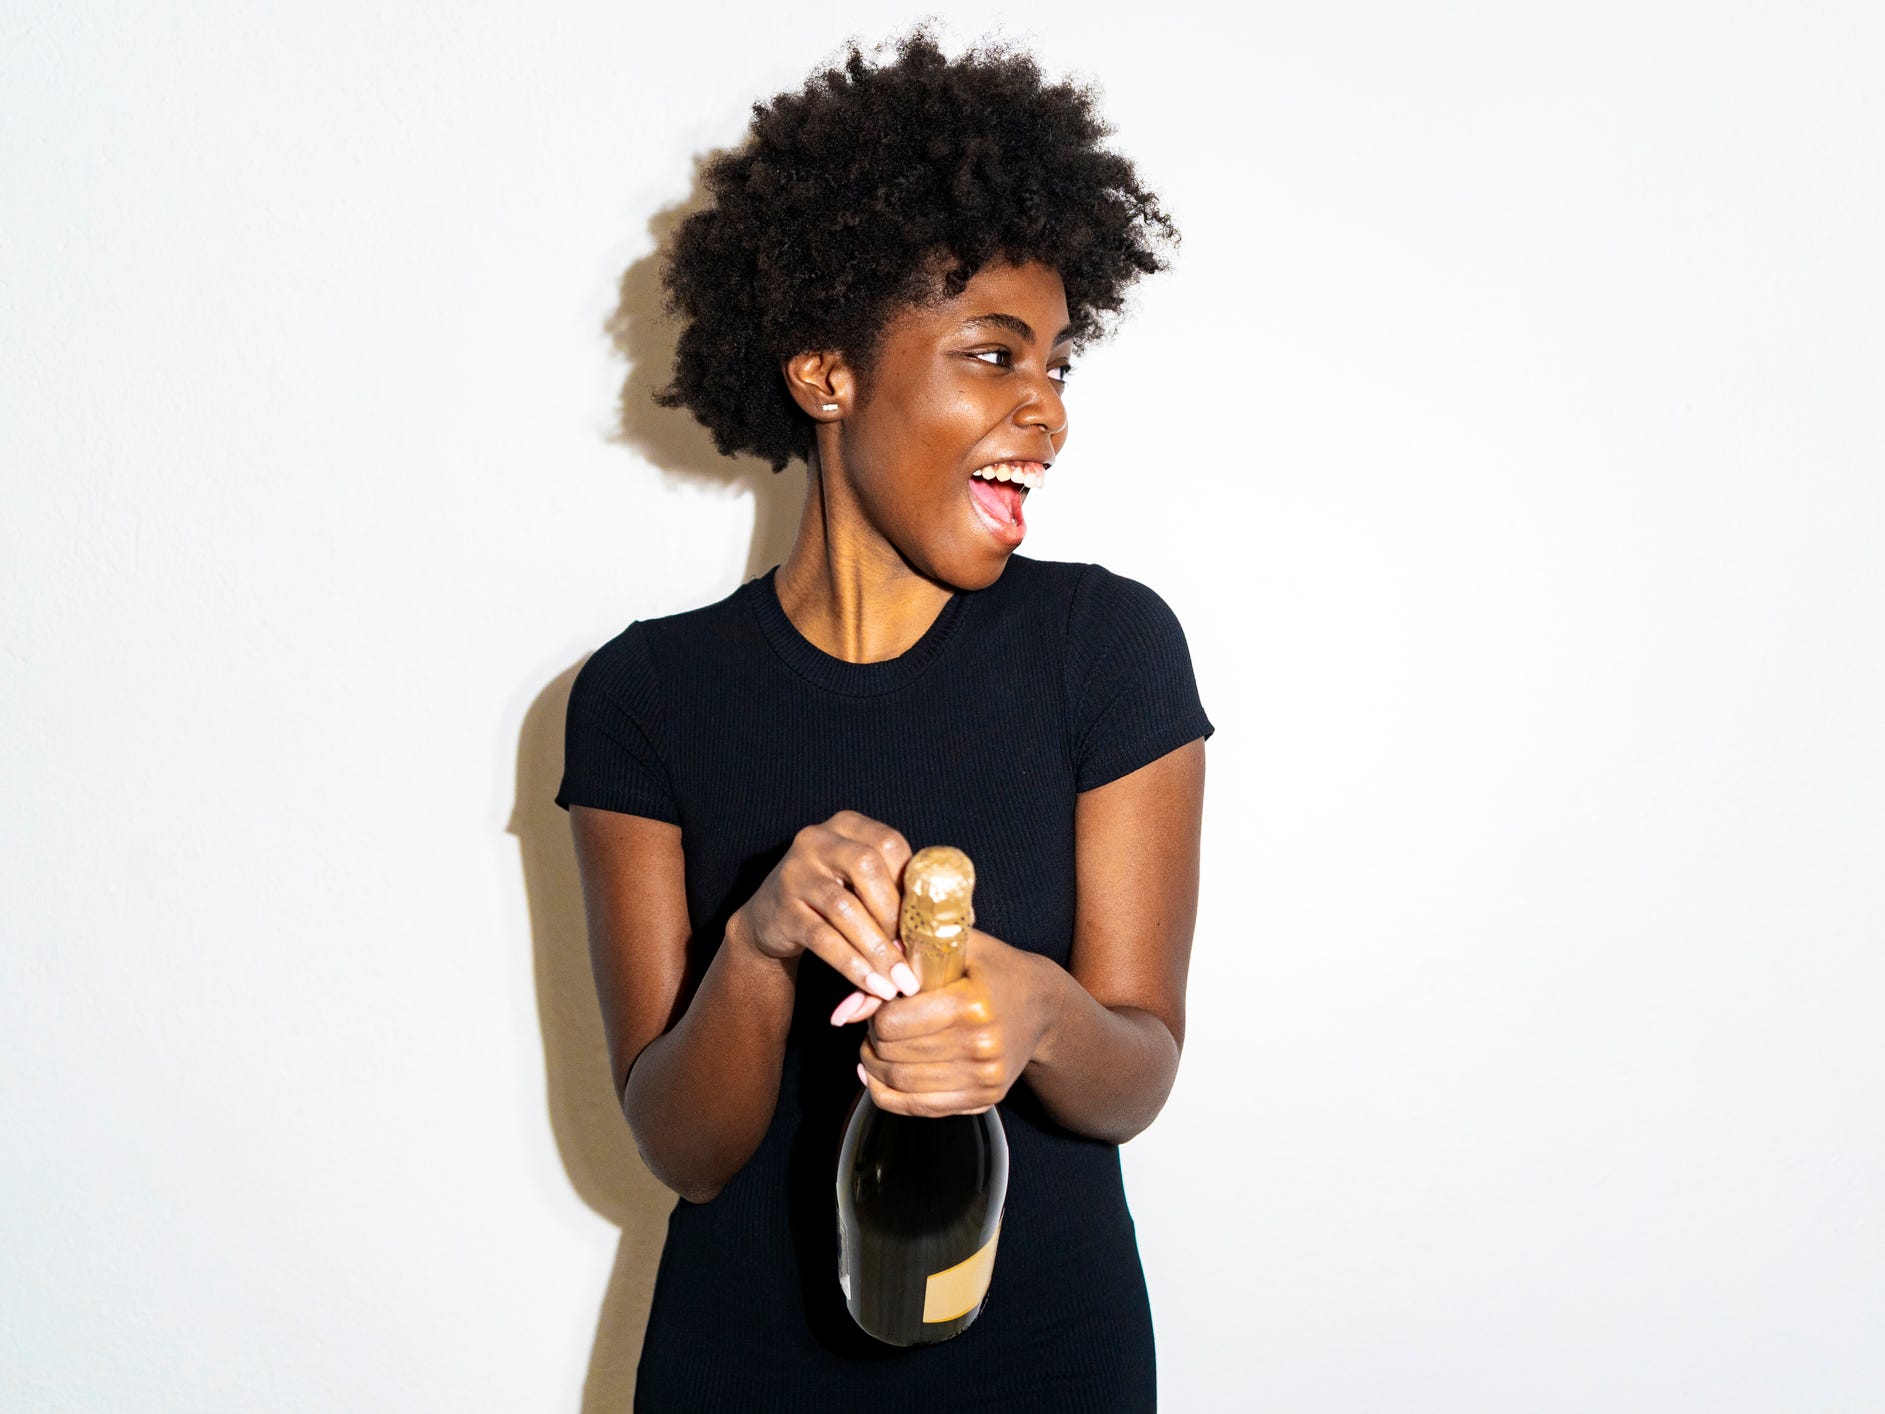 A woman opening up a bottle of Champagne against a white background.